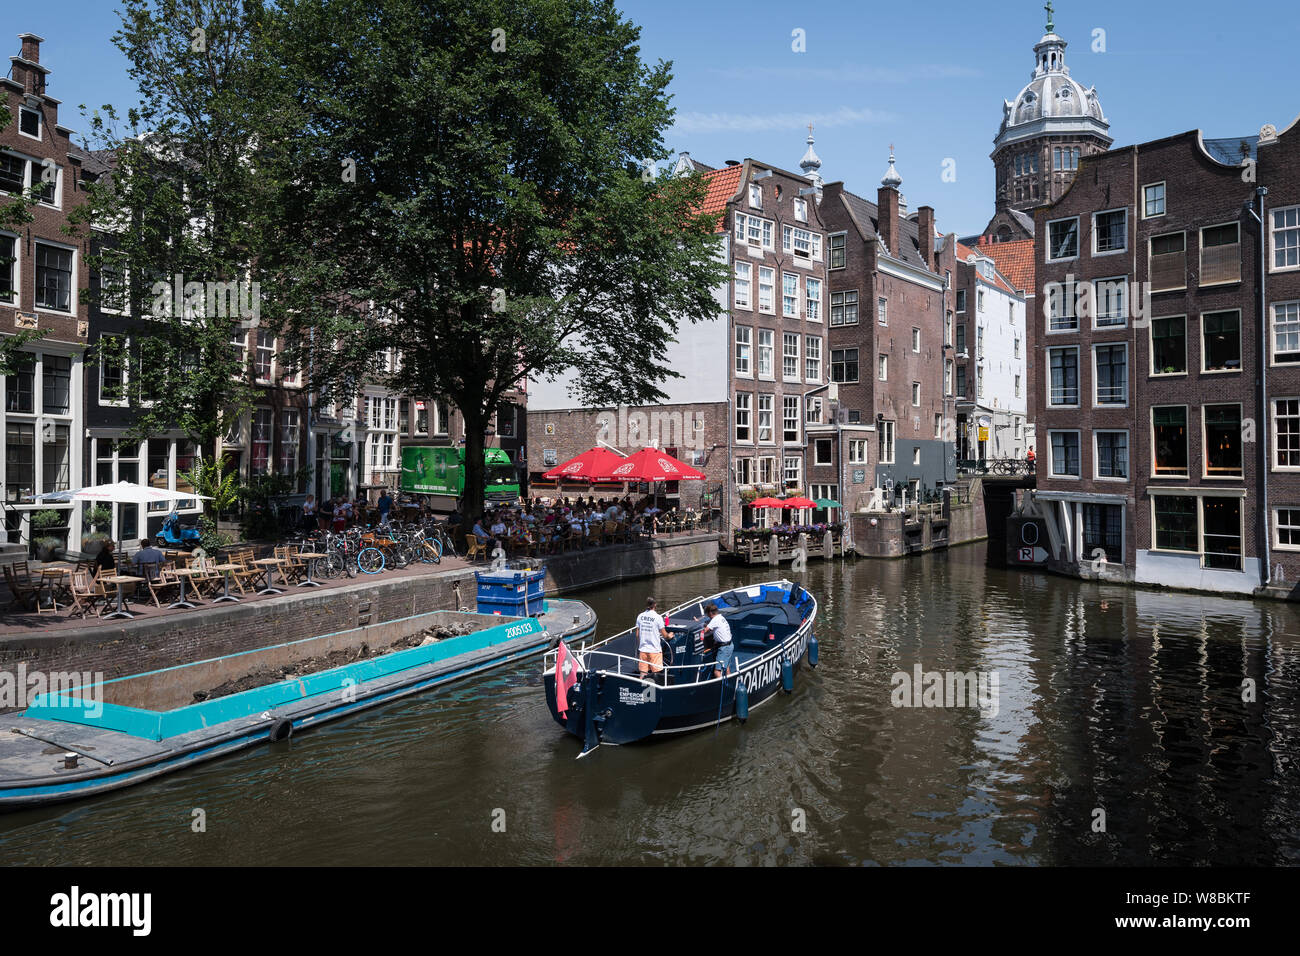 Amsterdam, Netherlands - July 2019: Summer cruising on Amsterdam's canals Stock Photo